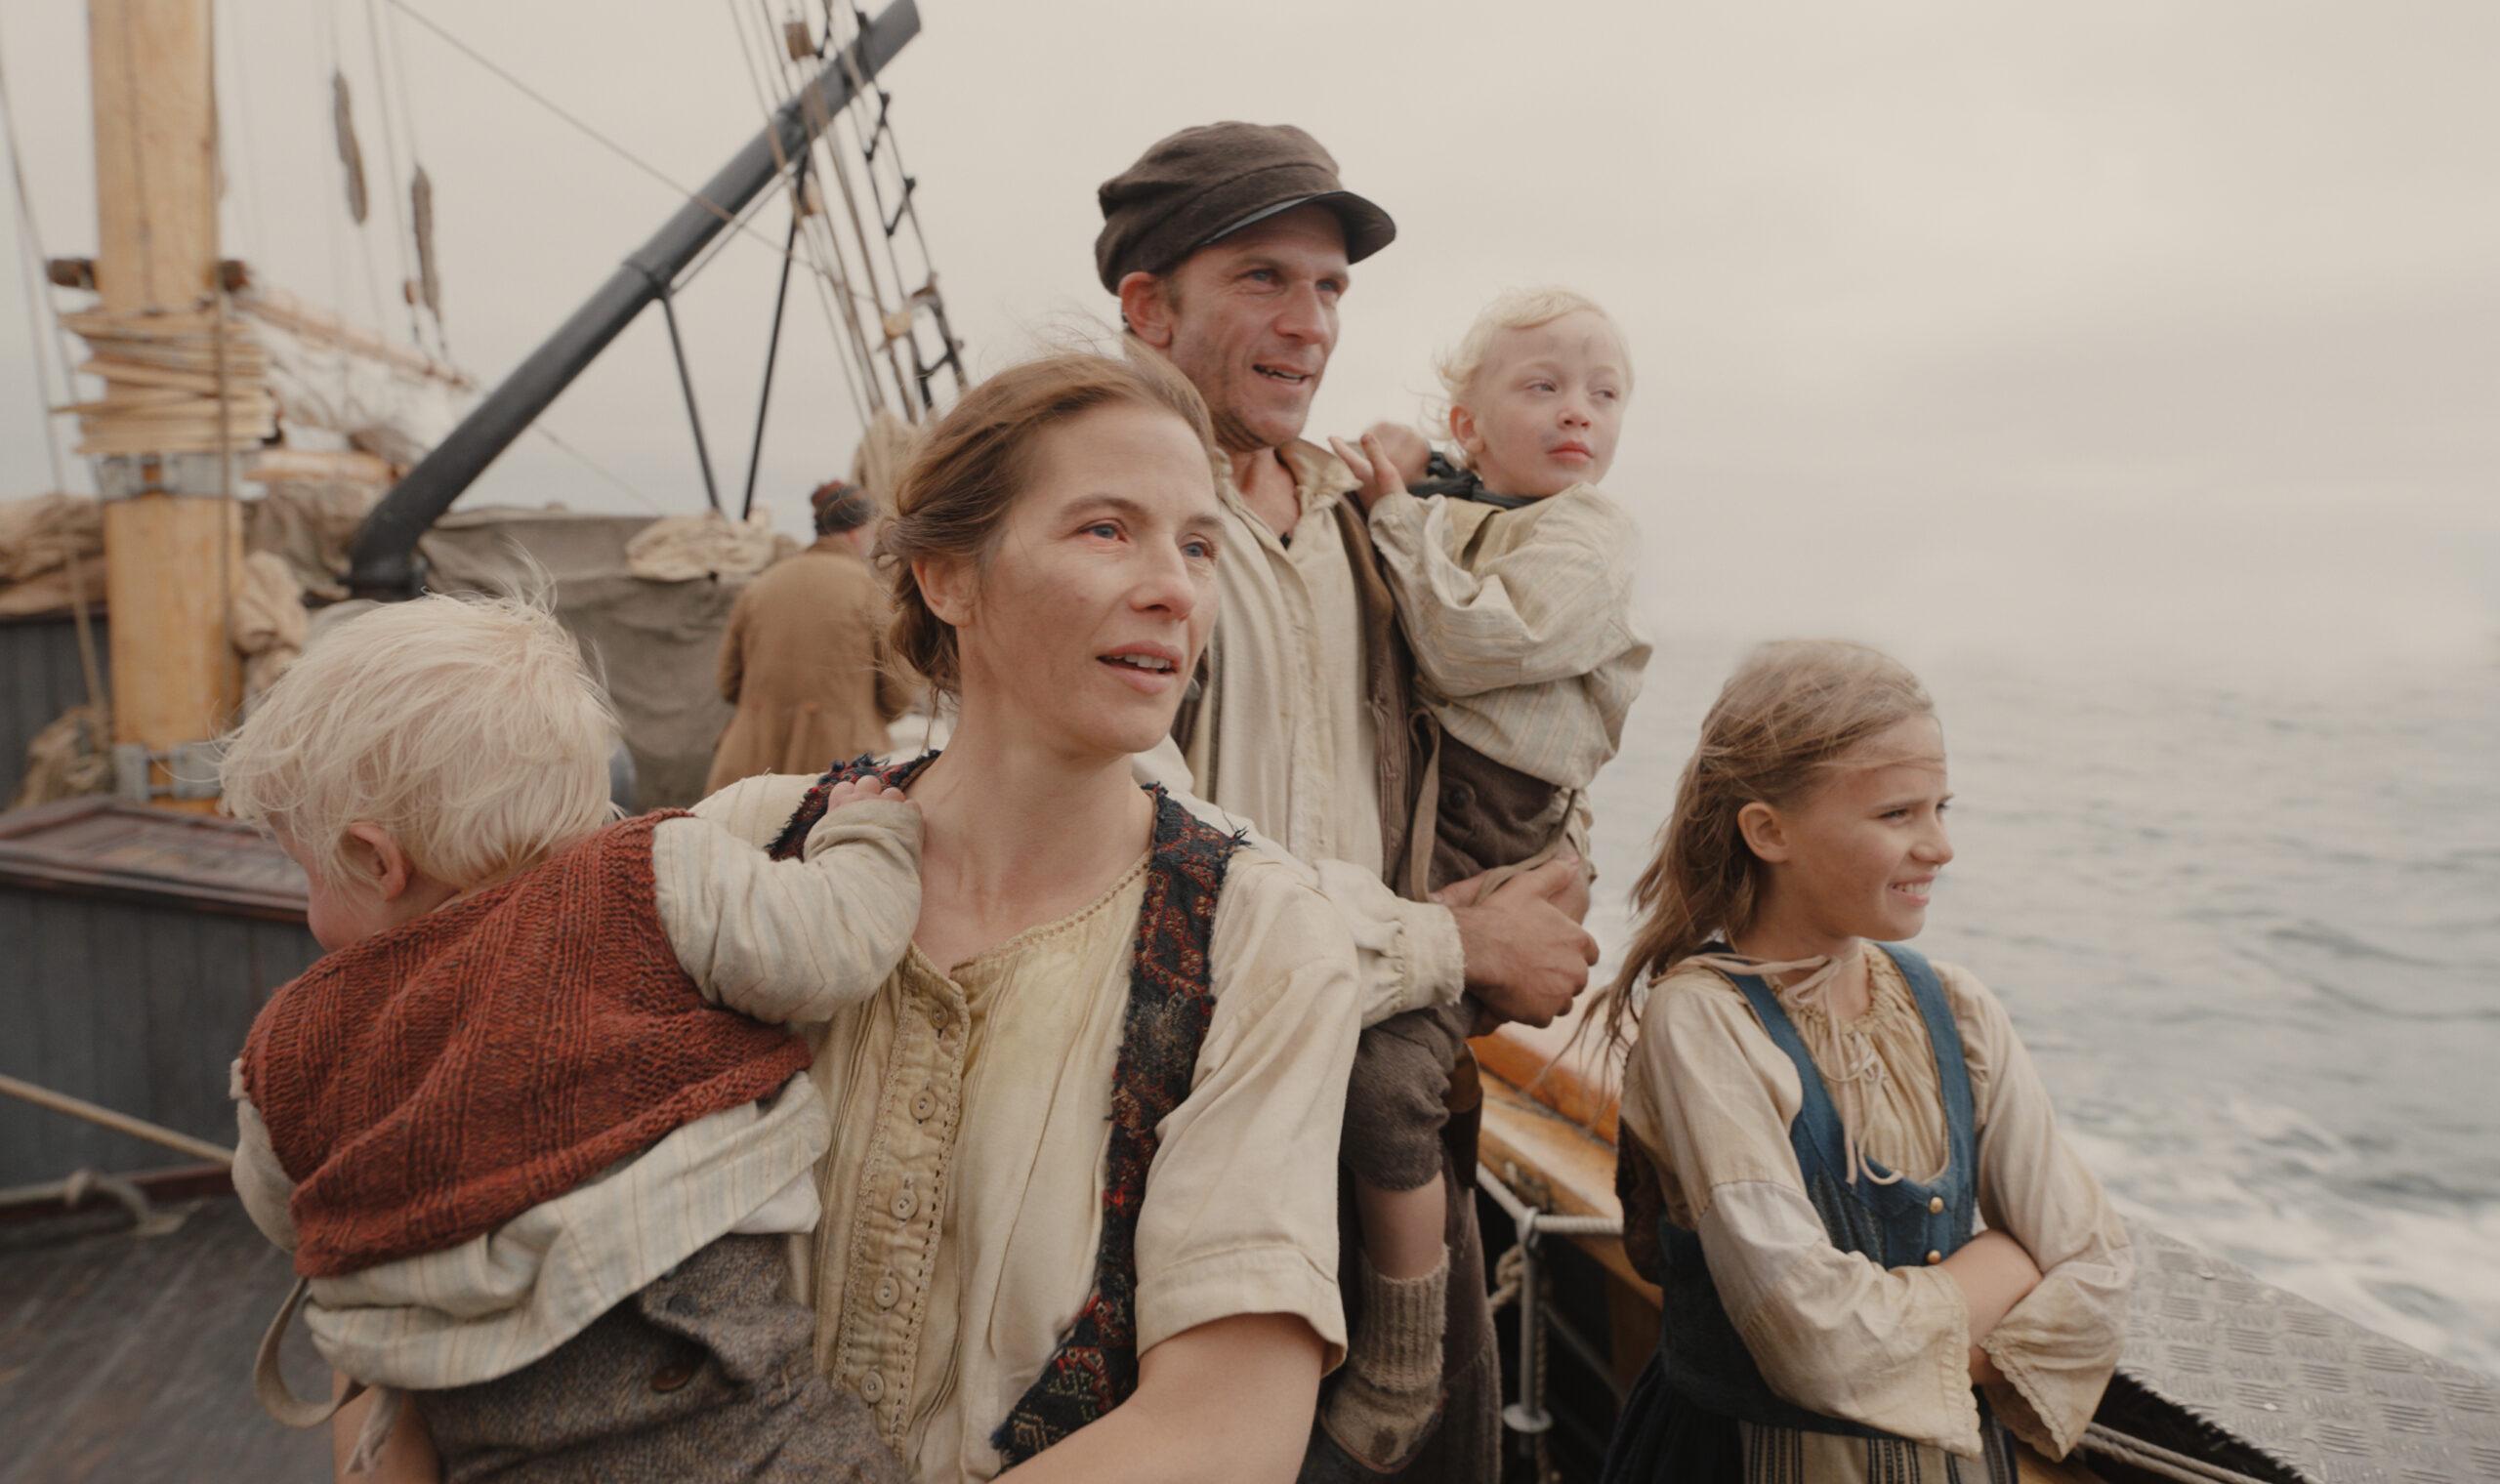 A still from the film The emigrants, showing a Swedish family on the boat to the United states in the mid-19th century.